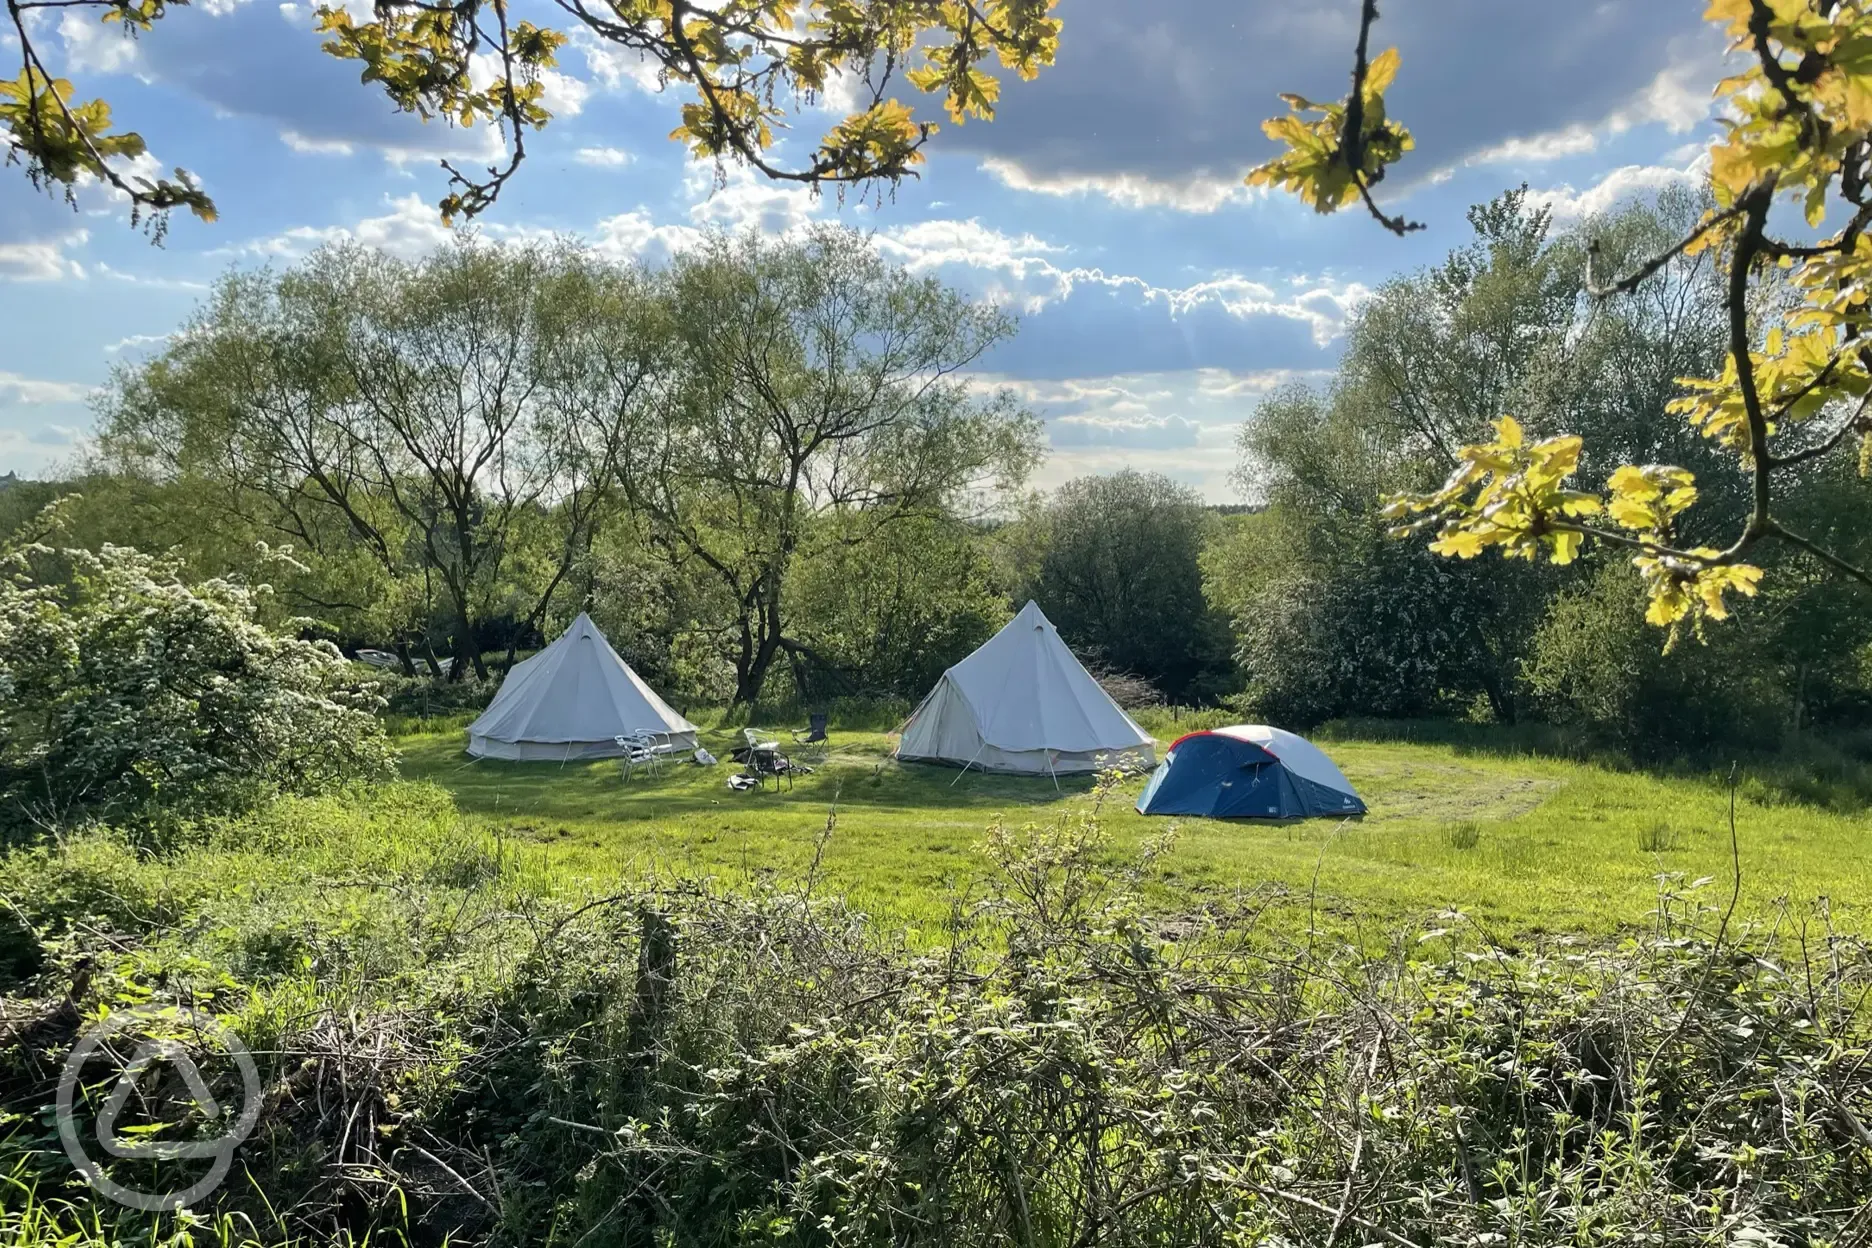 Our 5 metre Bell Tents